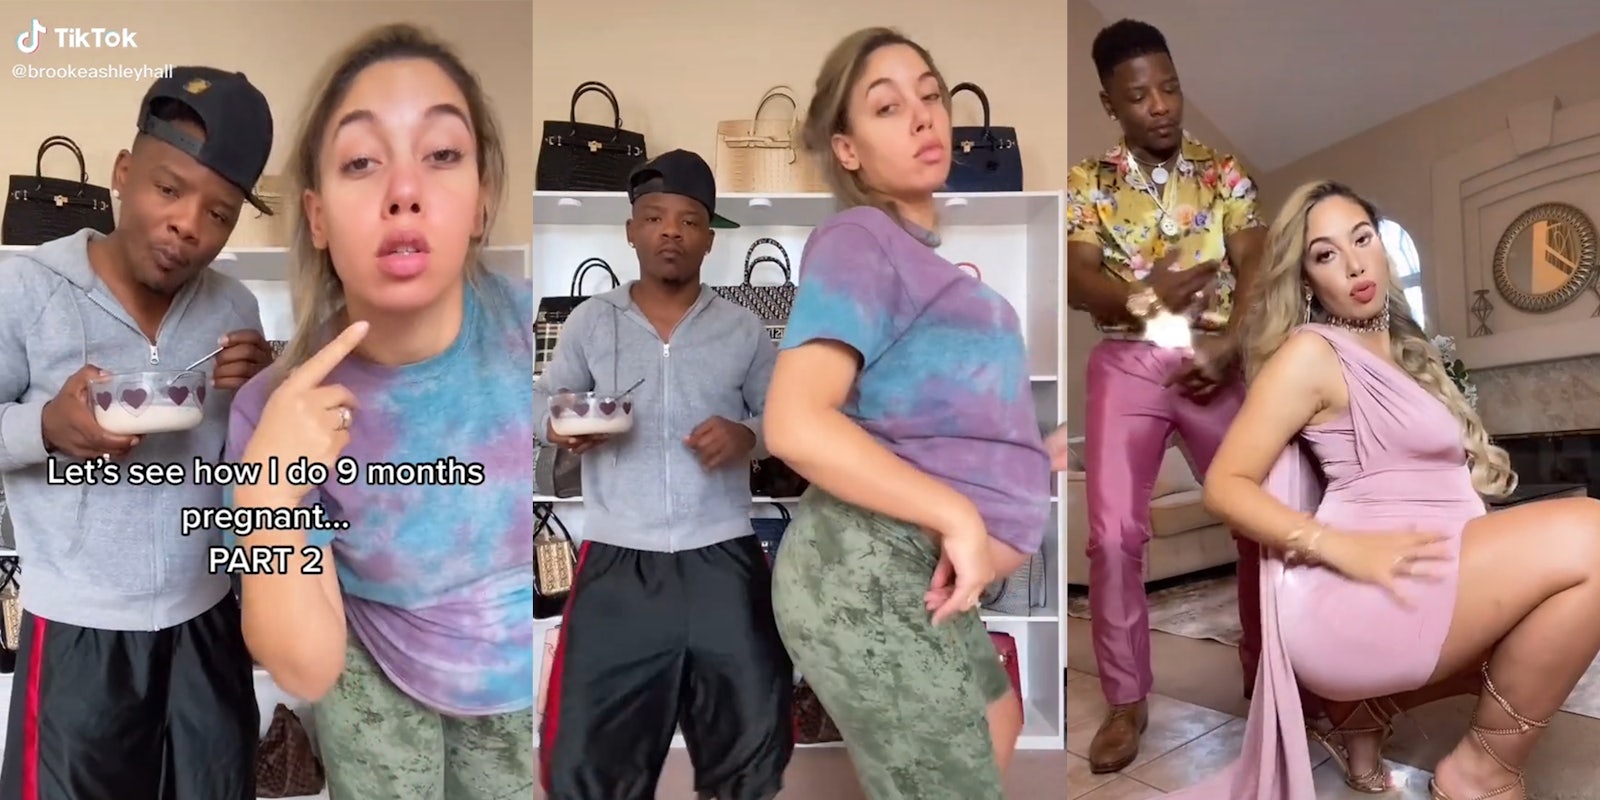 man and 9 months pregnant woman doing tiktok 'buss it' challenge, going from casual clothes to high fashion